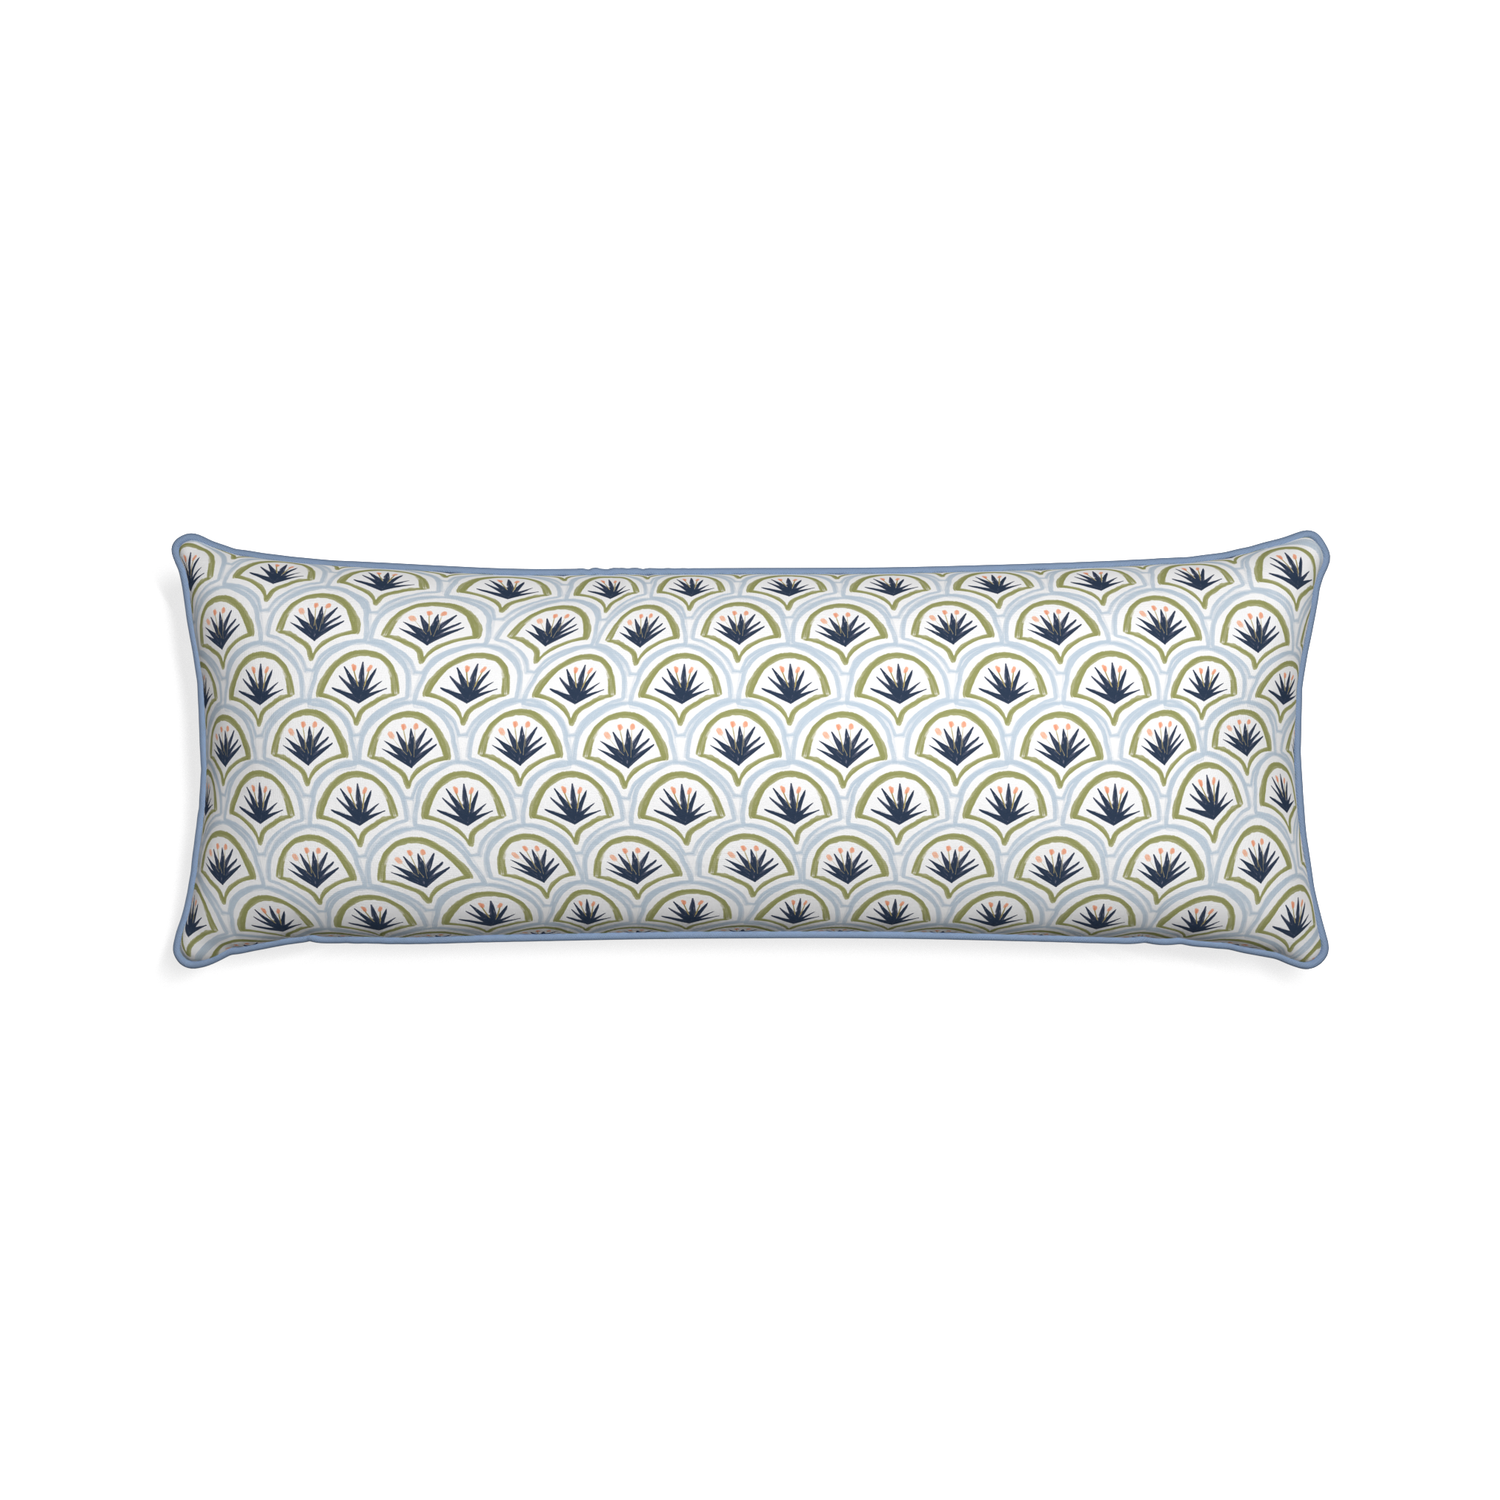 Xl-lumbar thatcher midnight custom art deco palm patternpillow with sky piping on white background